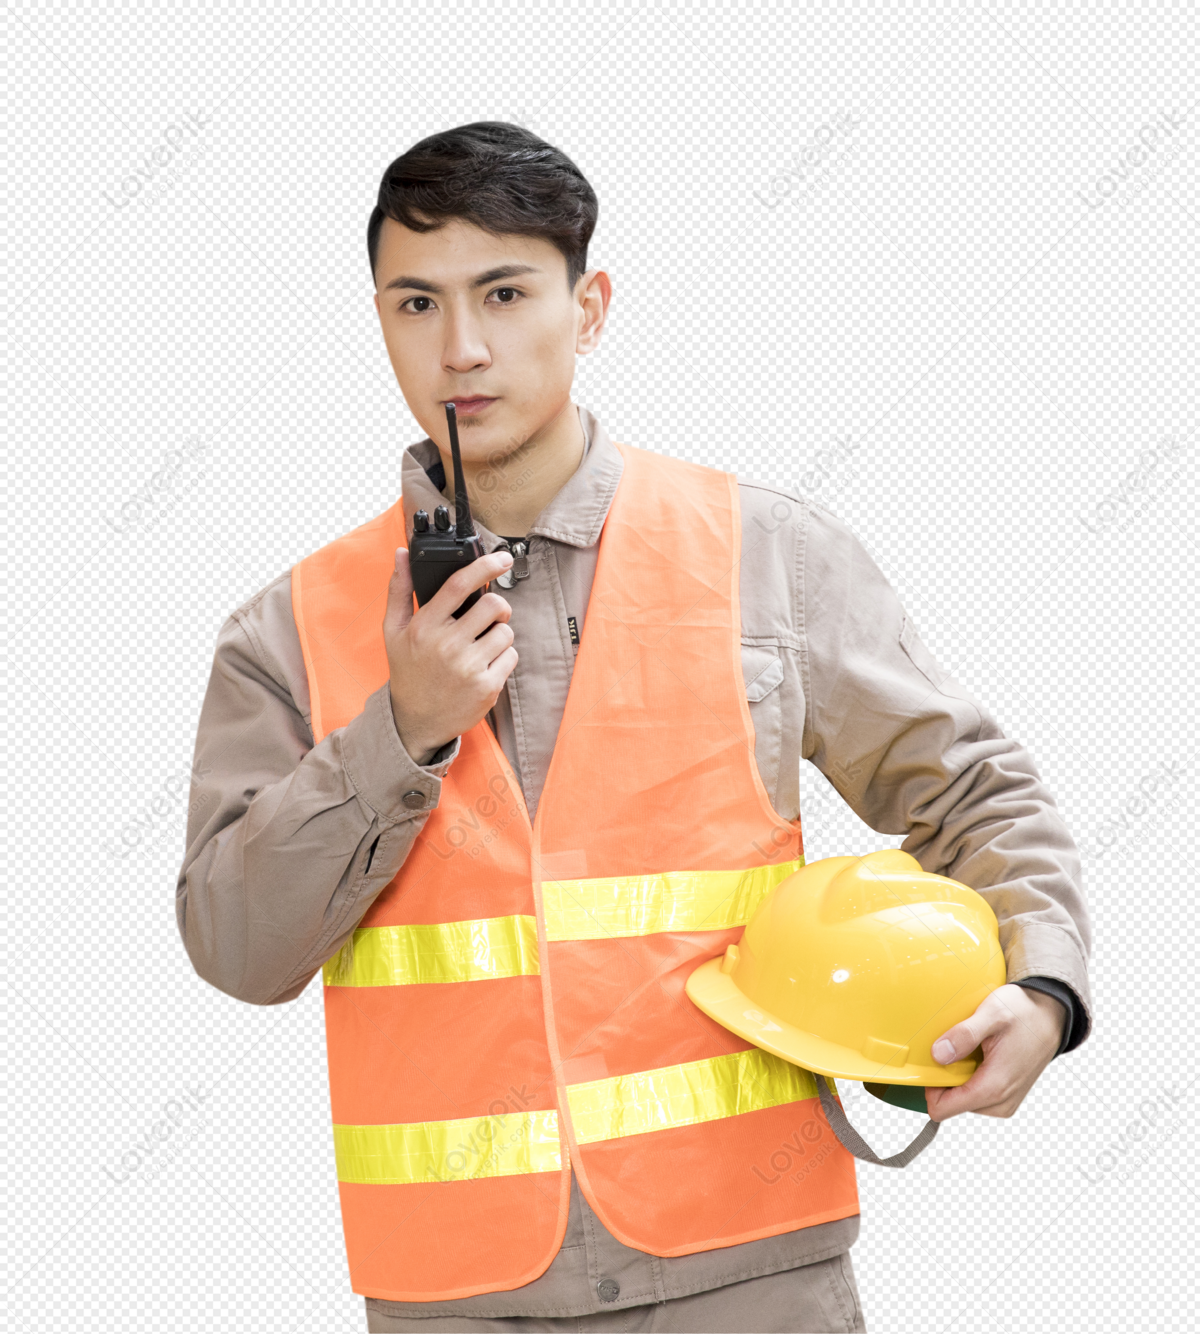 Factory Warehouse Workers Patrol Free PNG And Clipart Image For Free ...